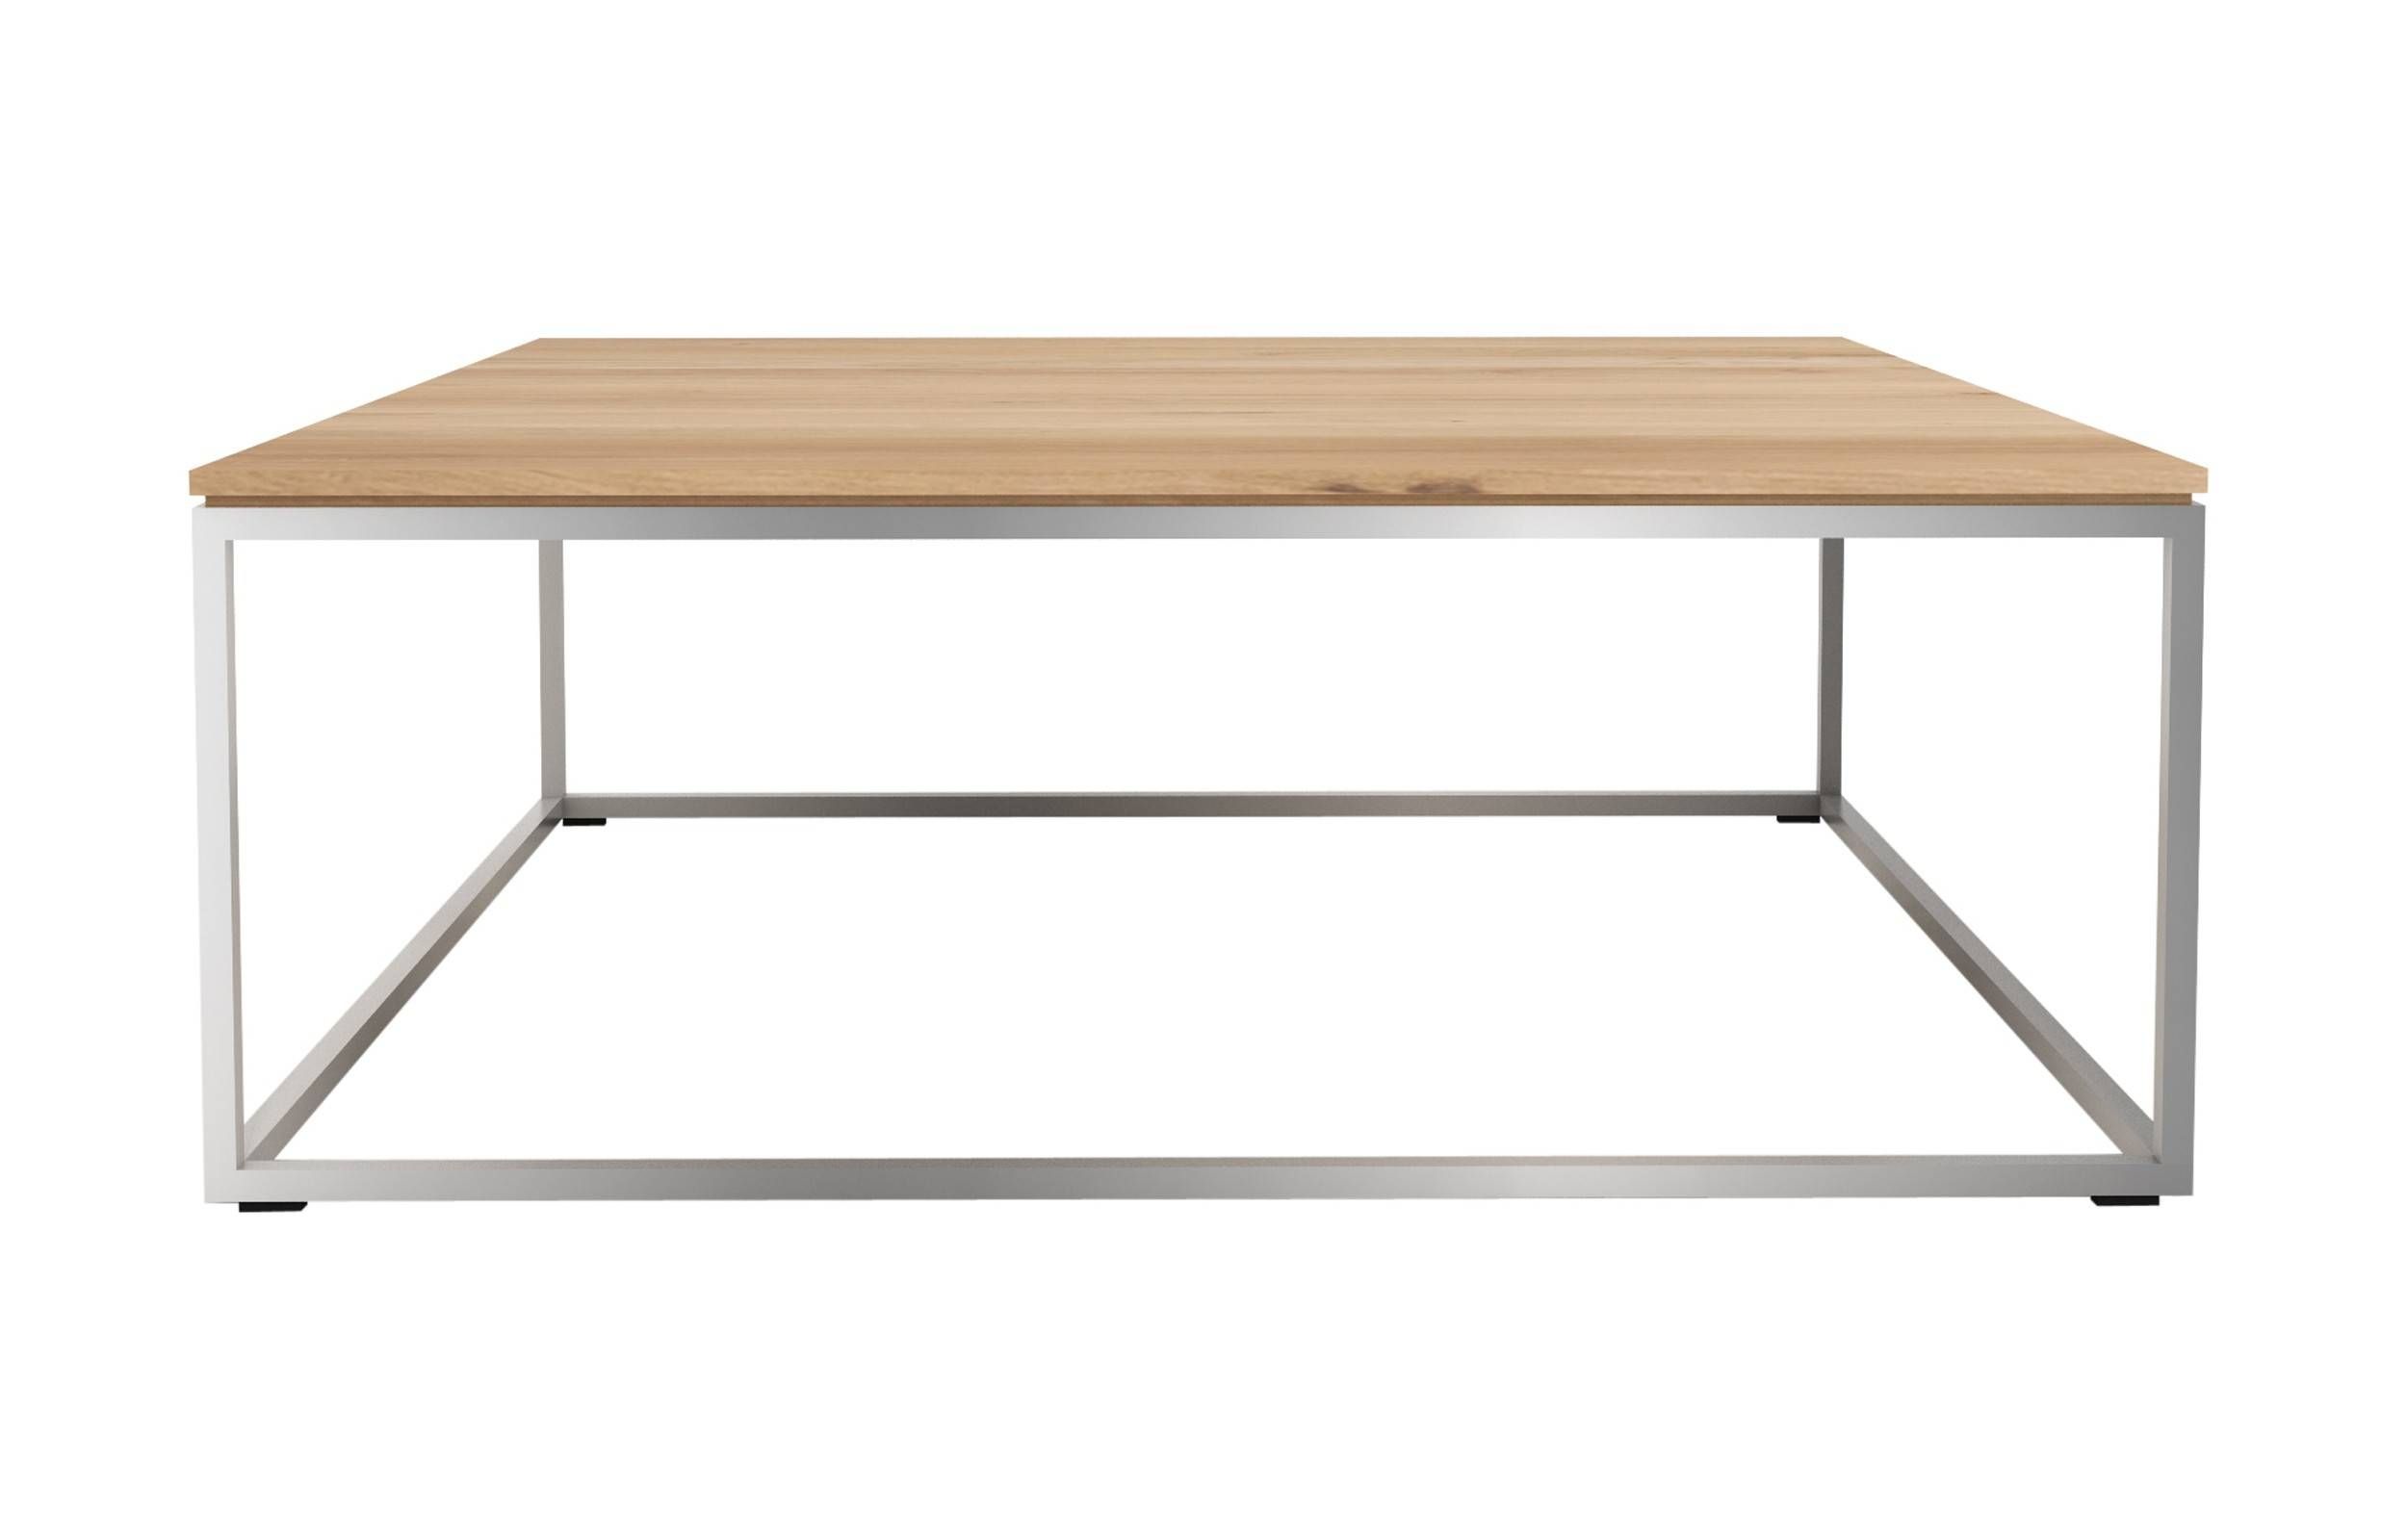 Thin Oak Coffee Table | Viesso Pertaining To Thin Coffee Tables (View 4 of 30)